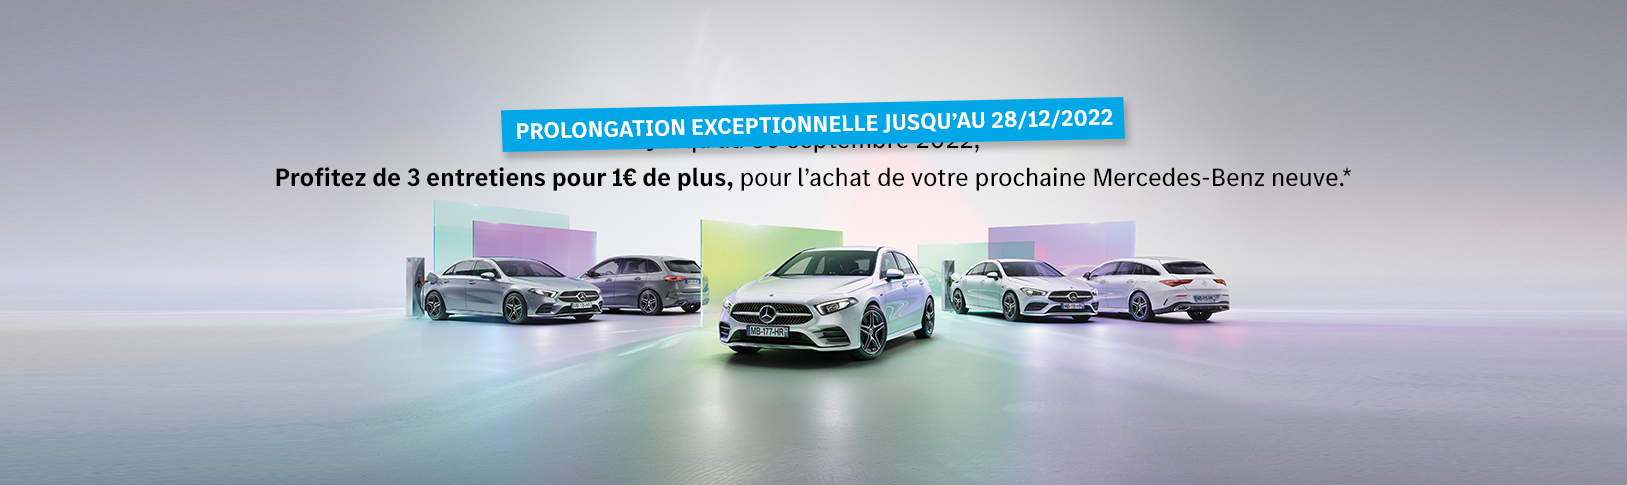 Offre exclusive Mercedes-Benz Groupe LG !